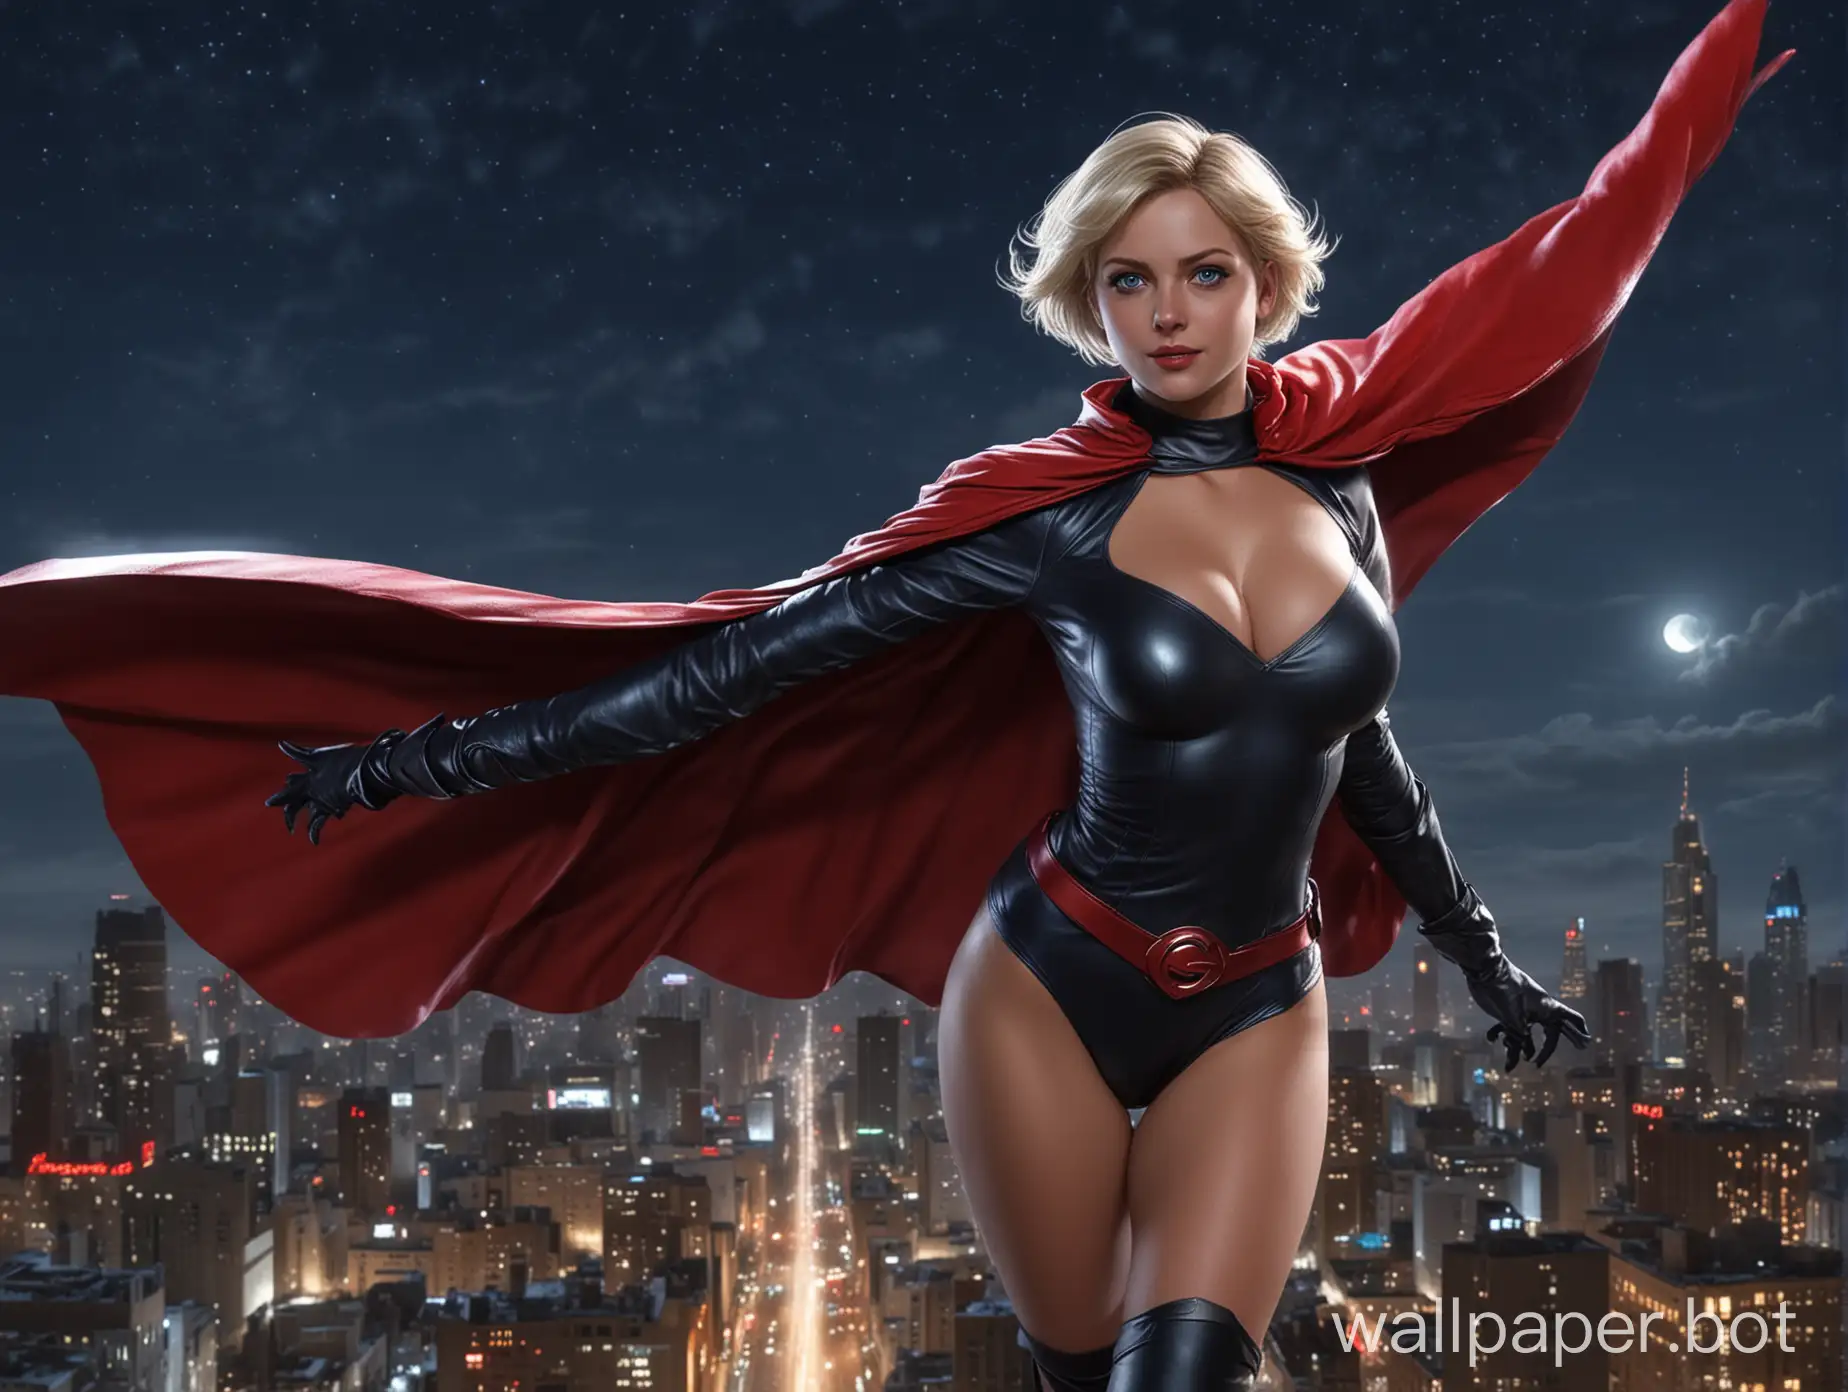 powergirl in a costume of black leather, with short hair, large breast, bright blue eyes gleaming, red cape unfurls in the wind, flies through the night sky above the city, moon shines brightly